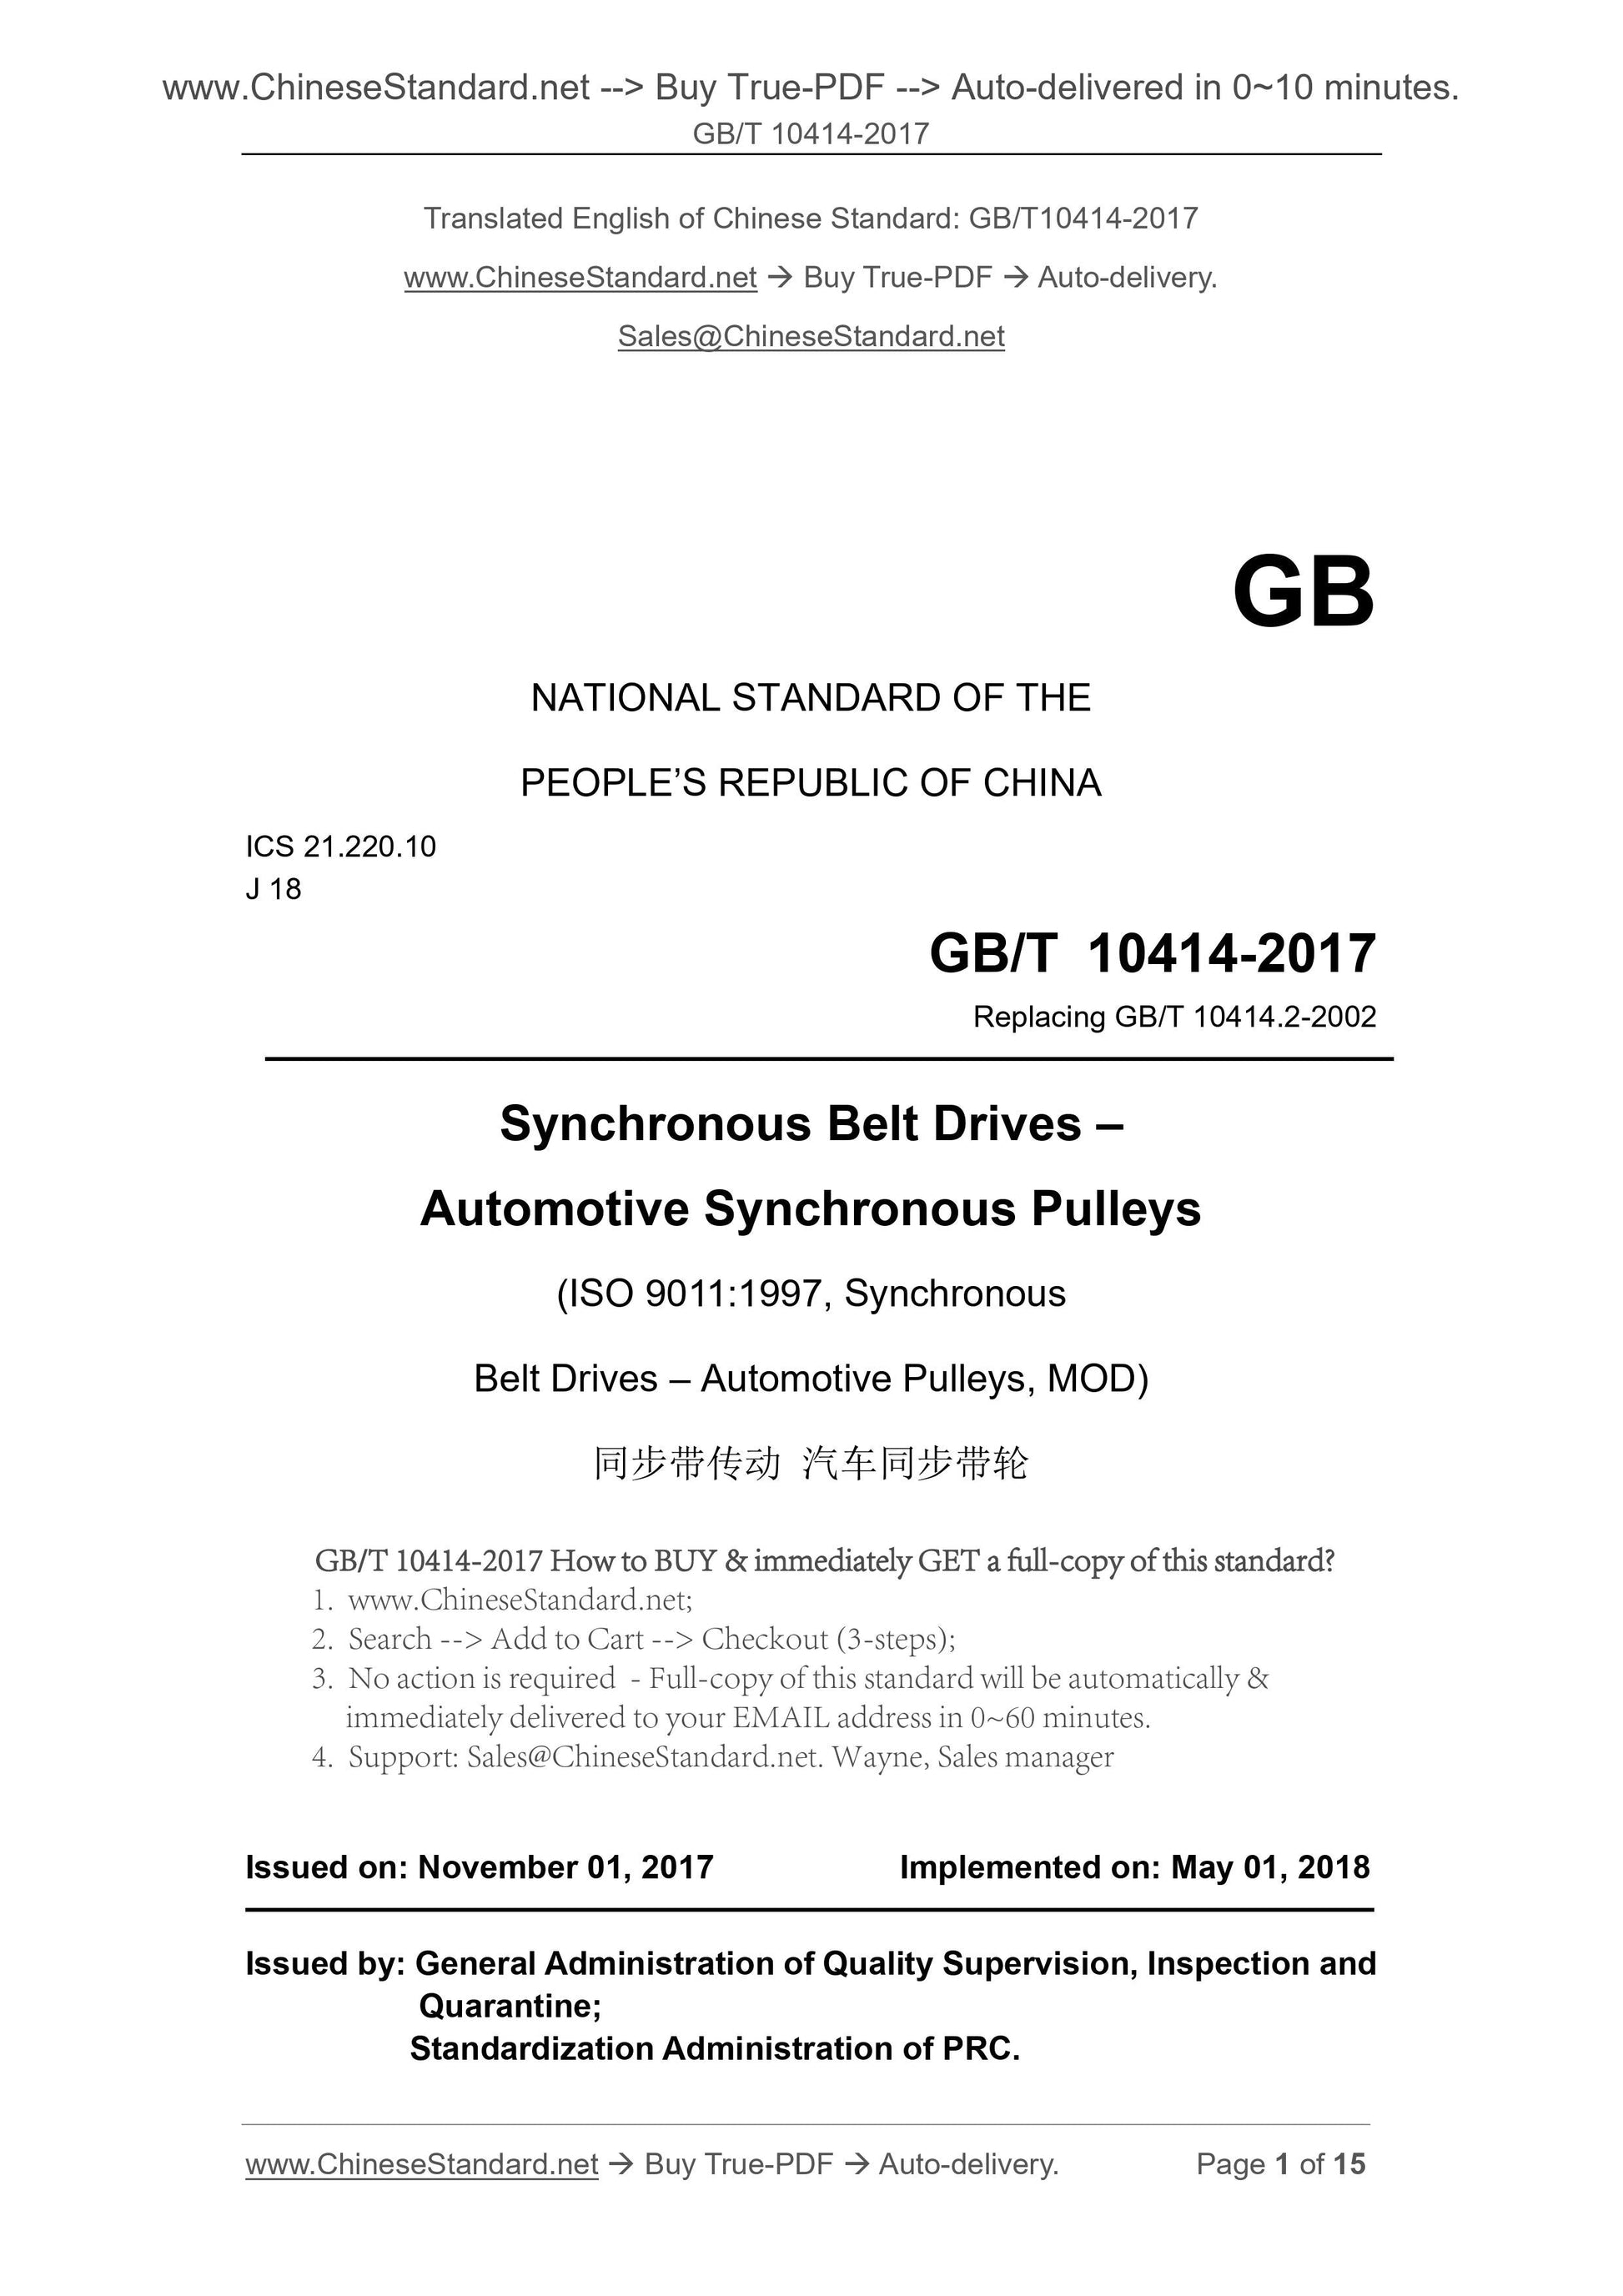 GB/T 10414-2017 Page 1